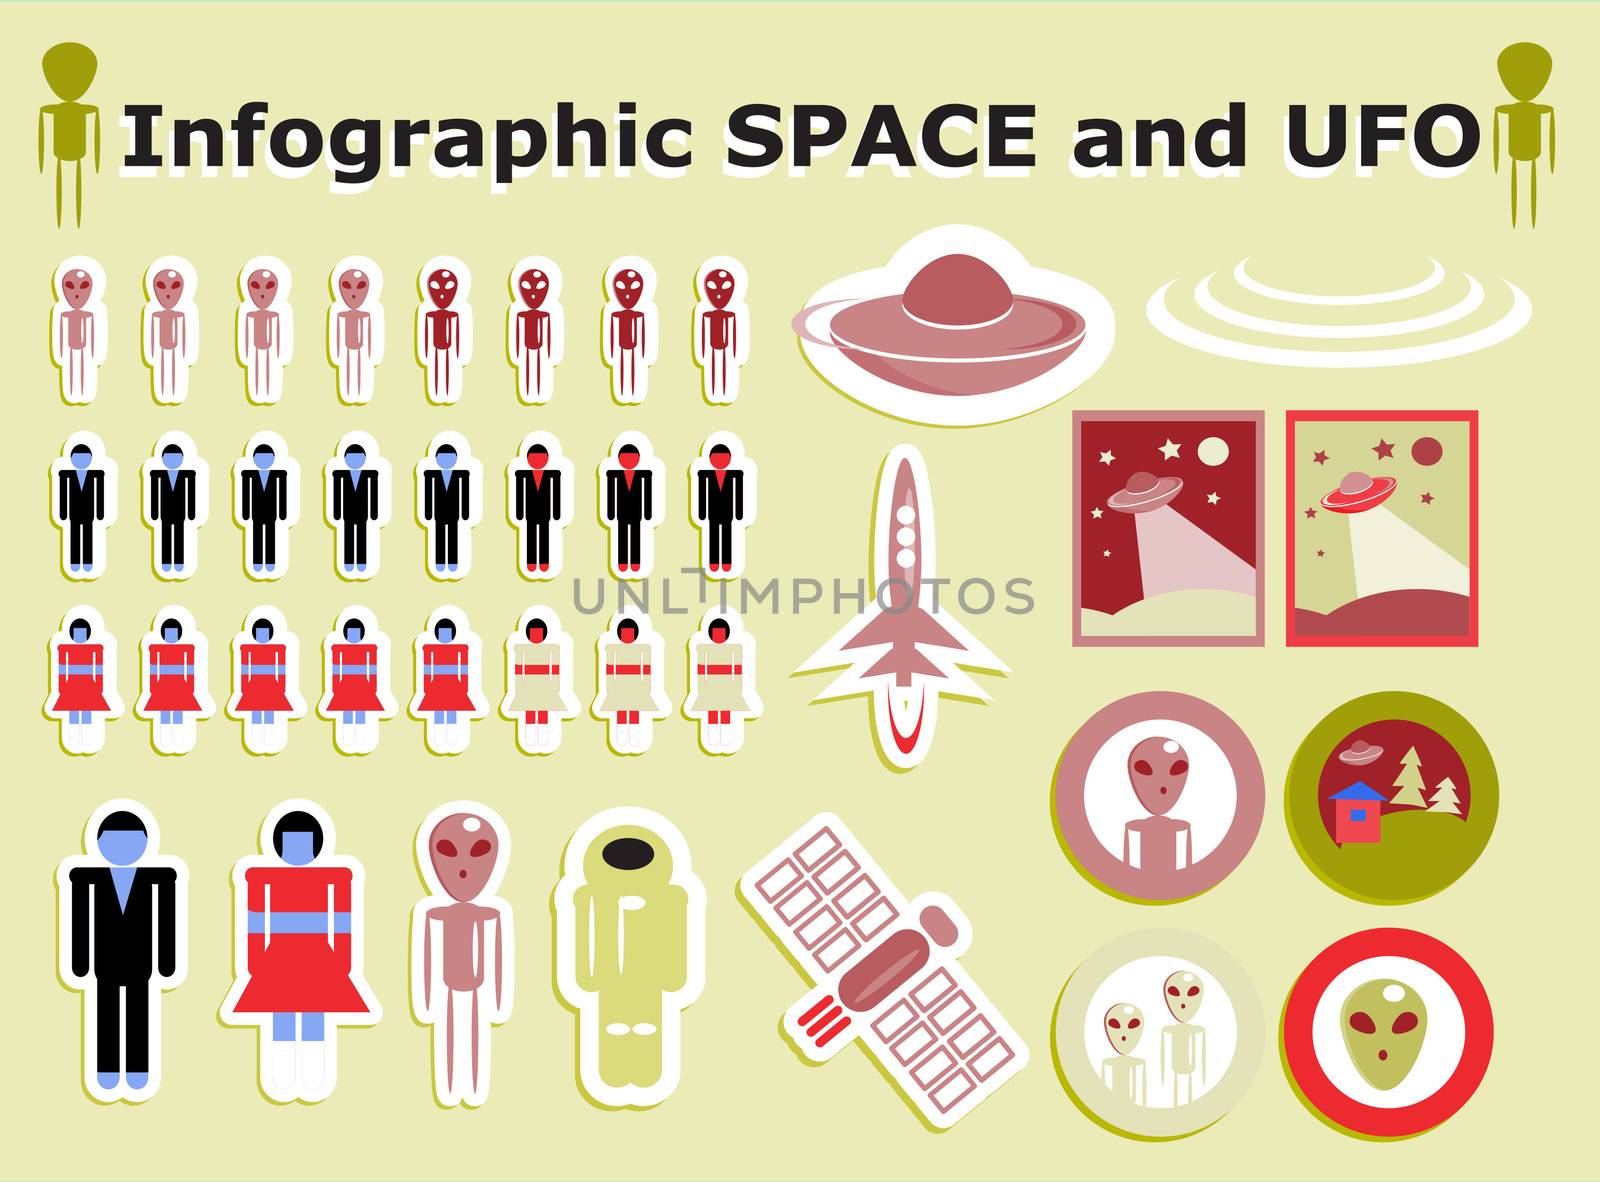 UFO infographic -Space and people icons set